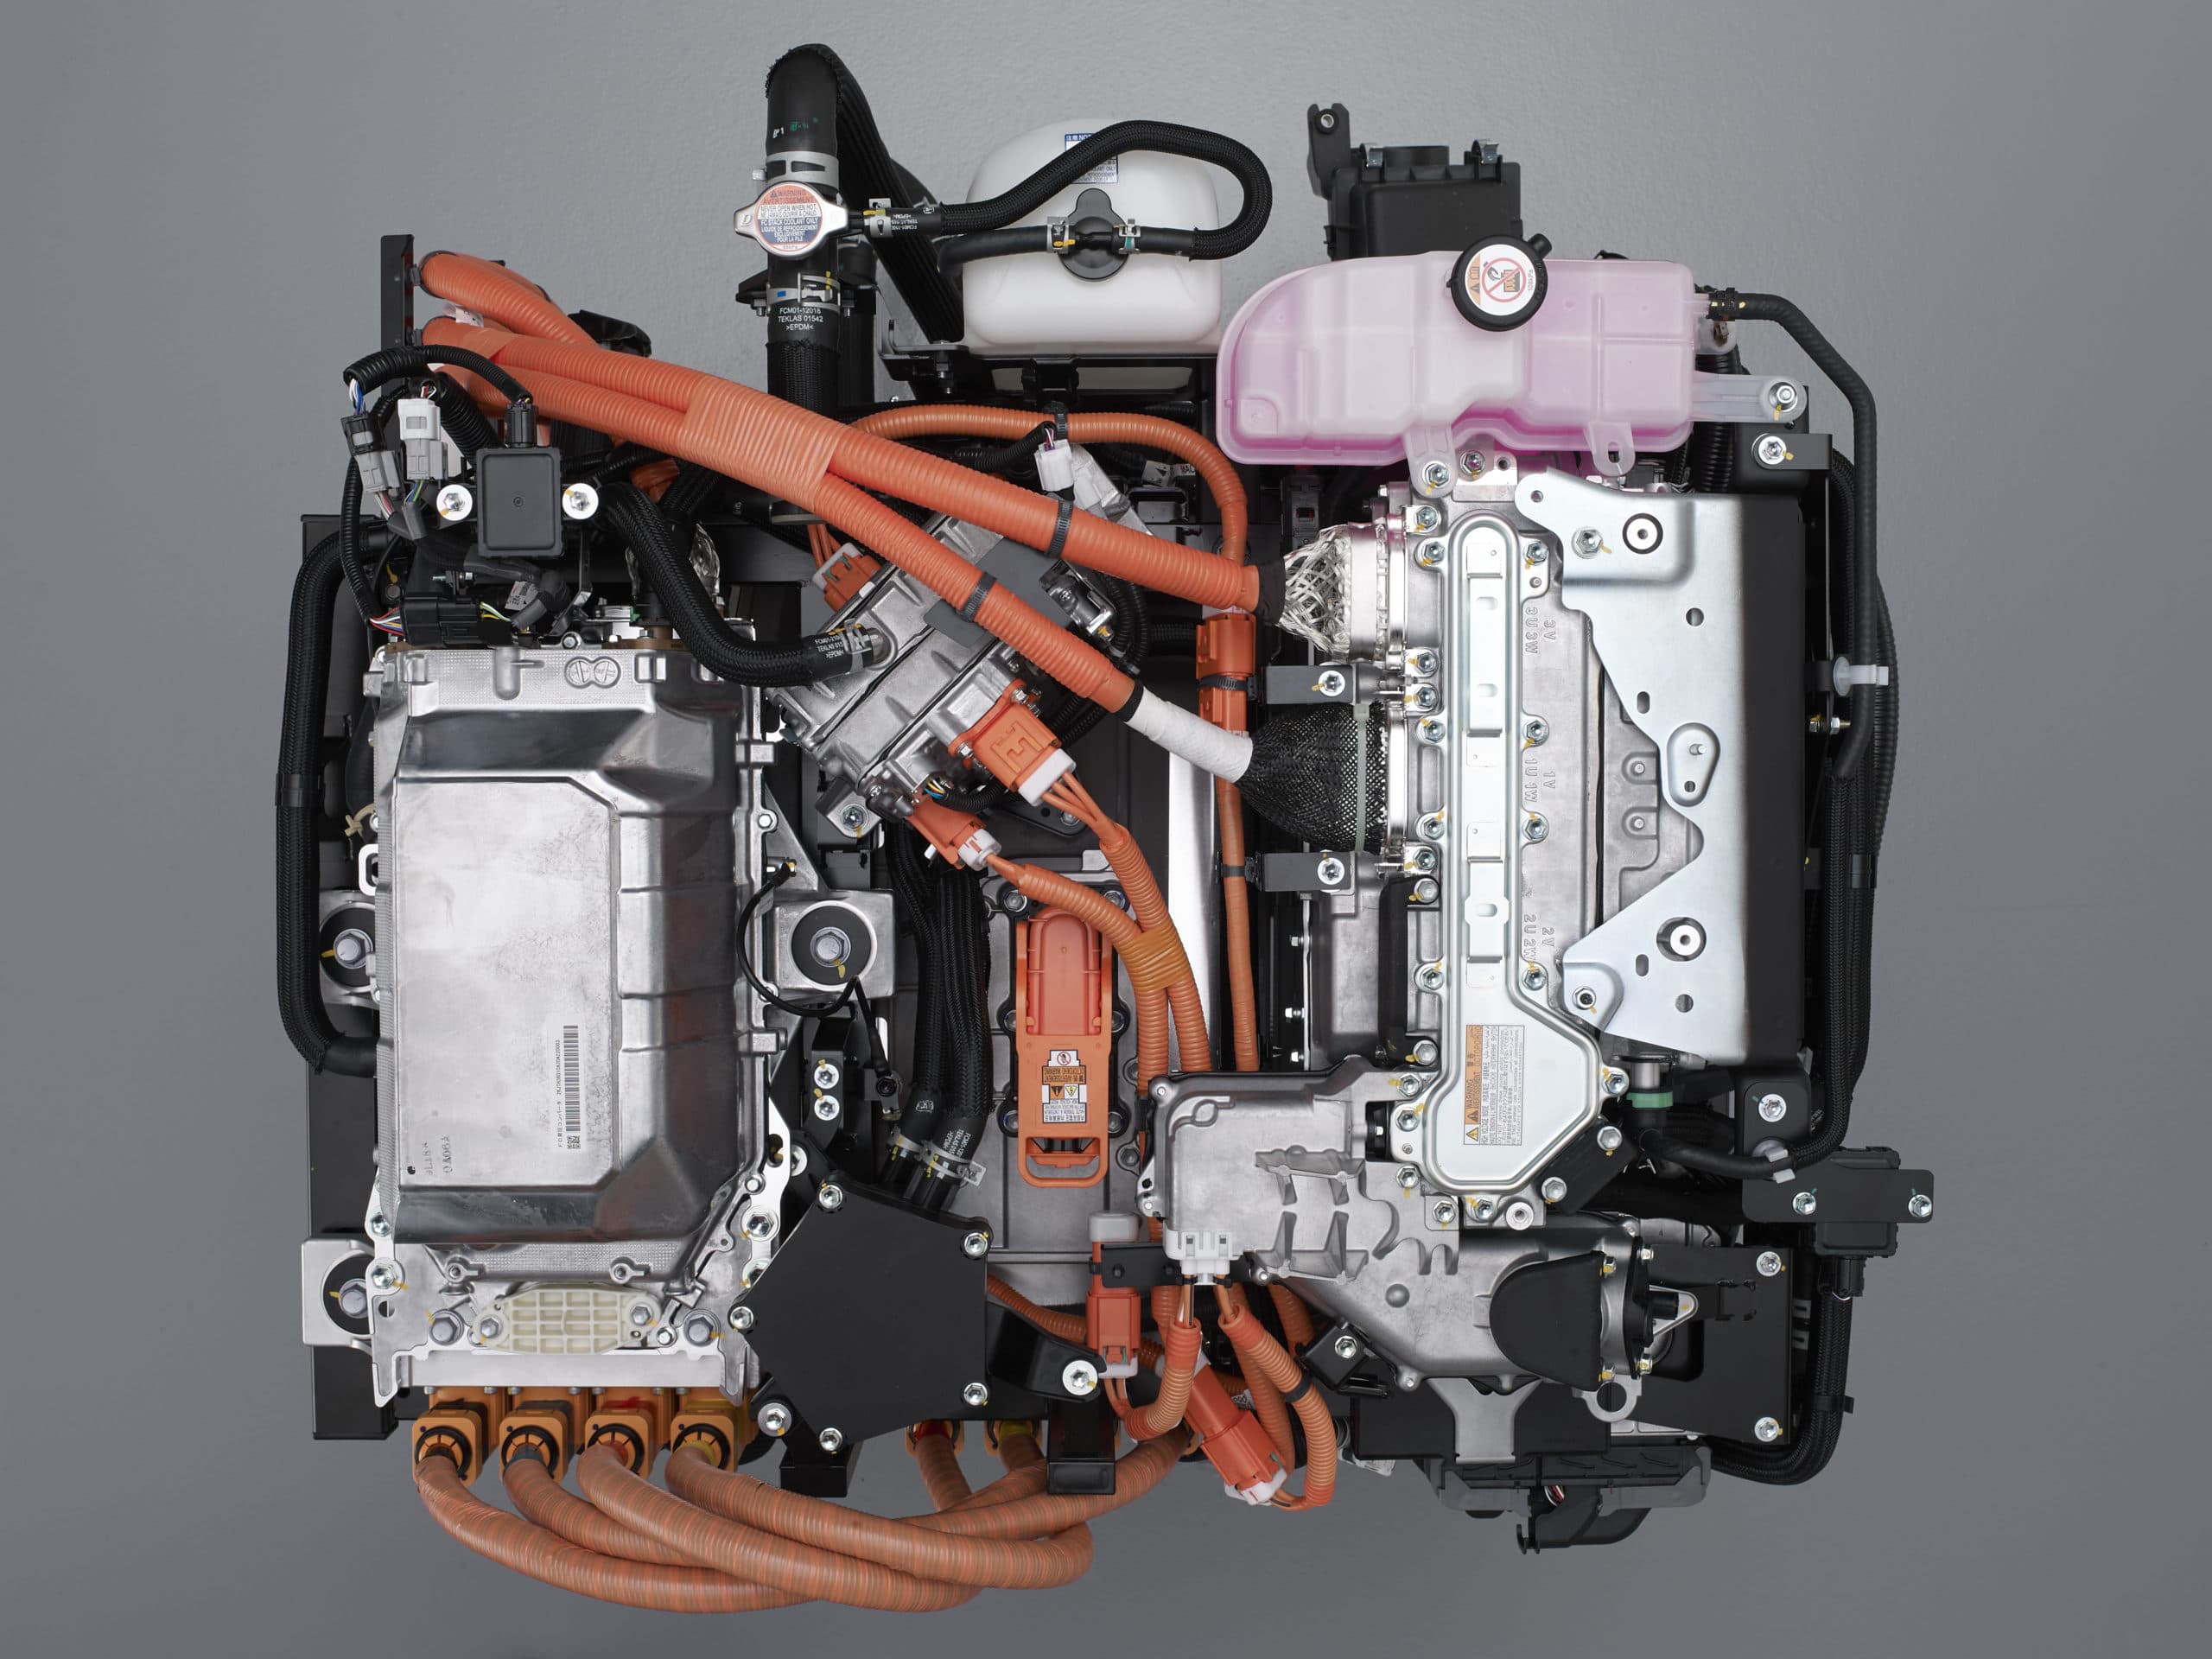 Toyota fuel cell technology